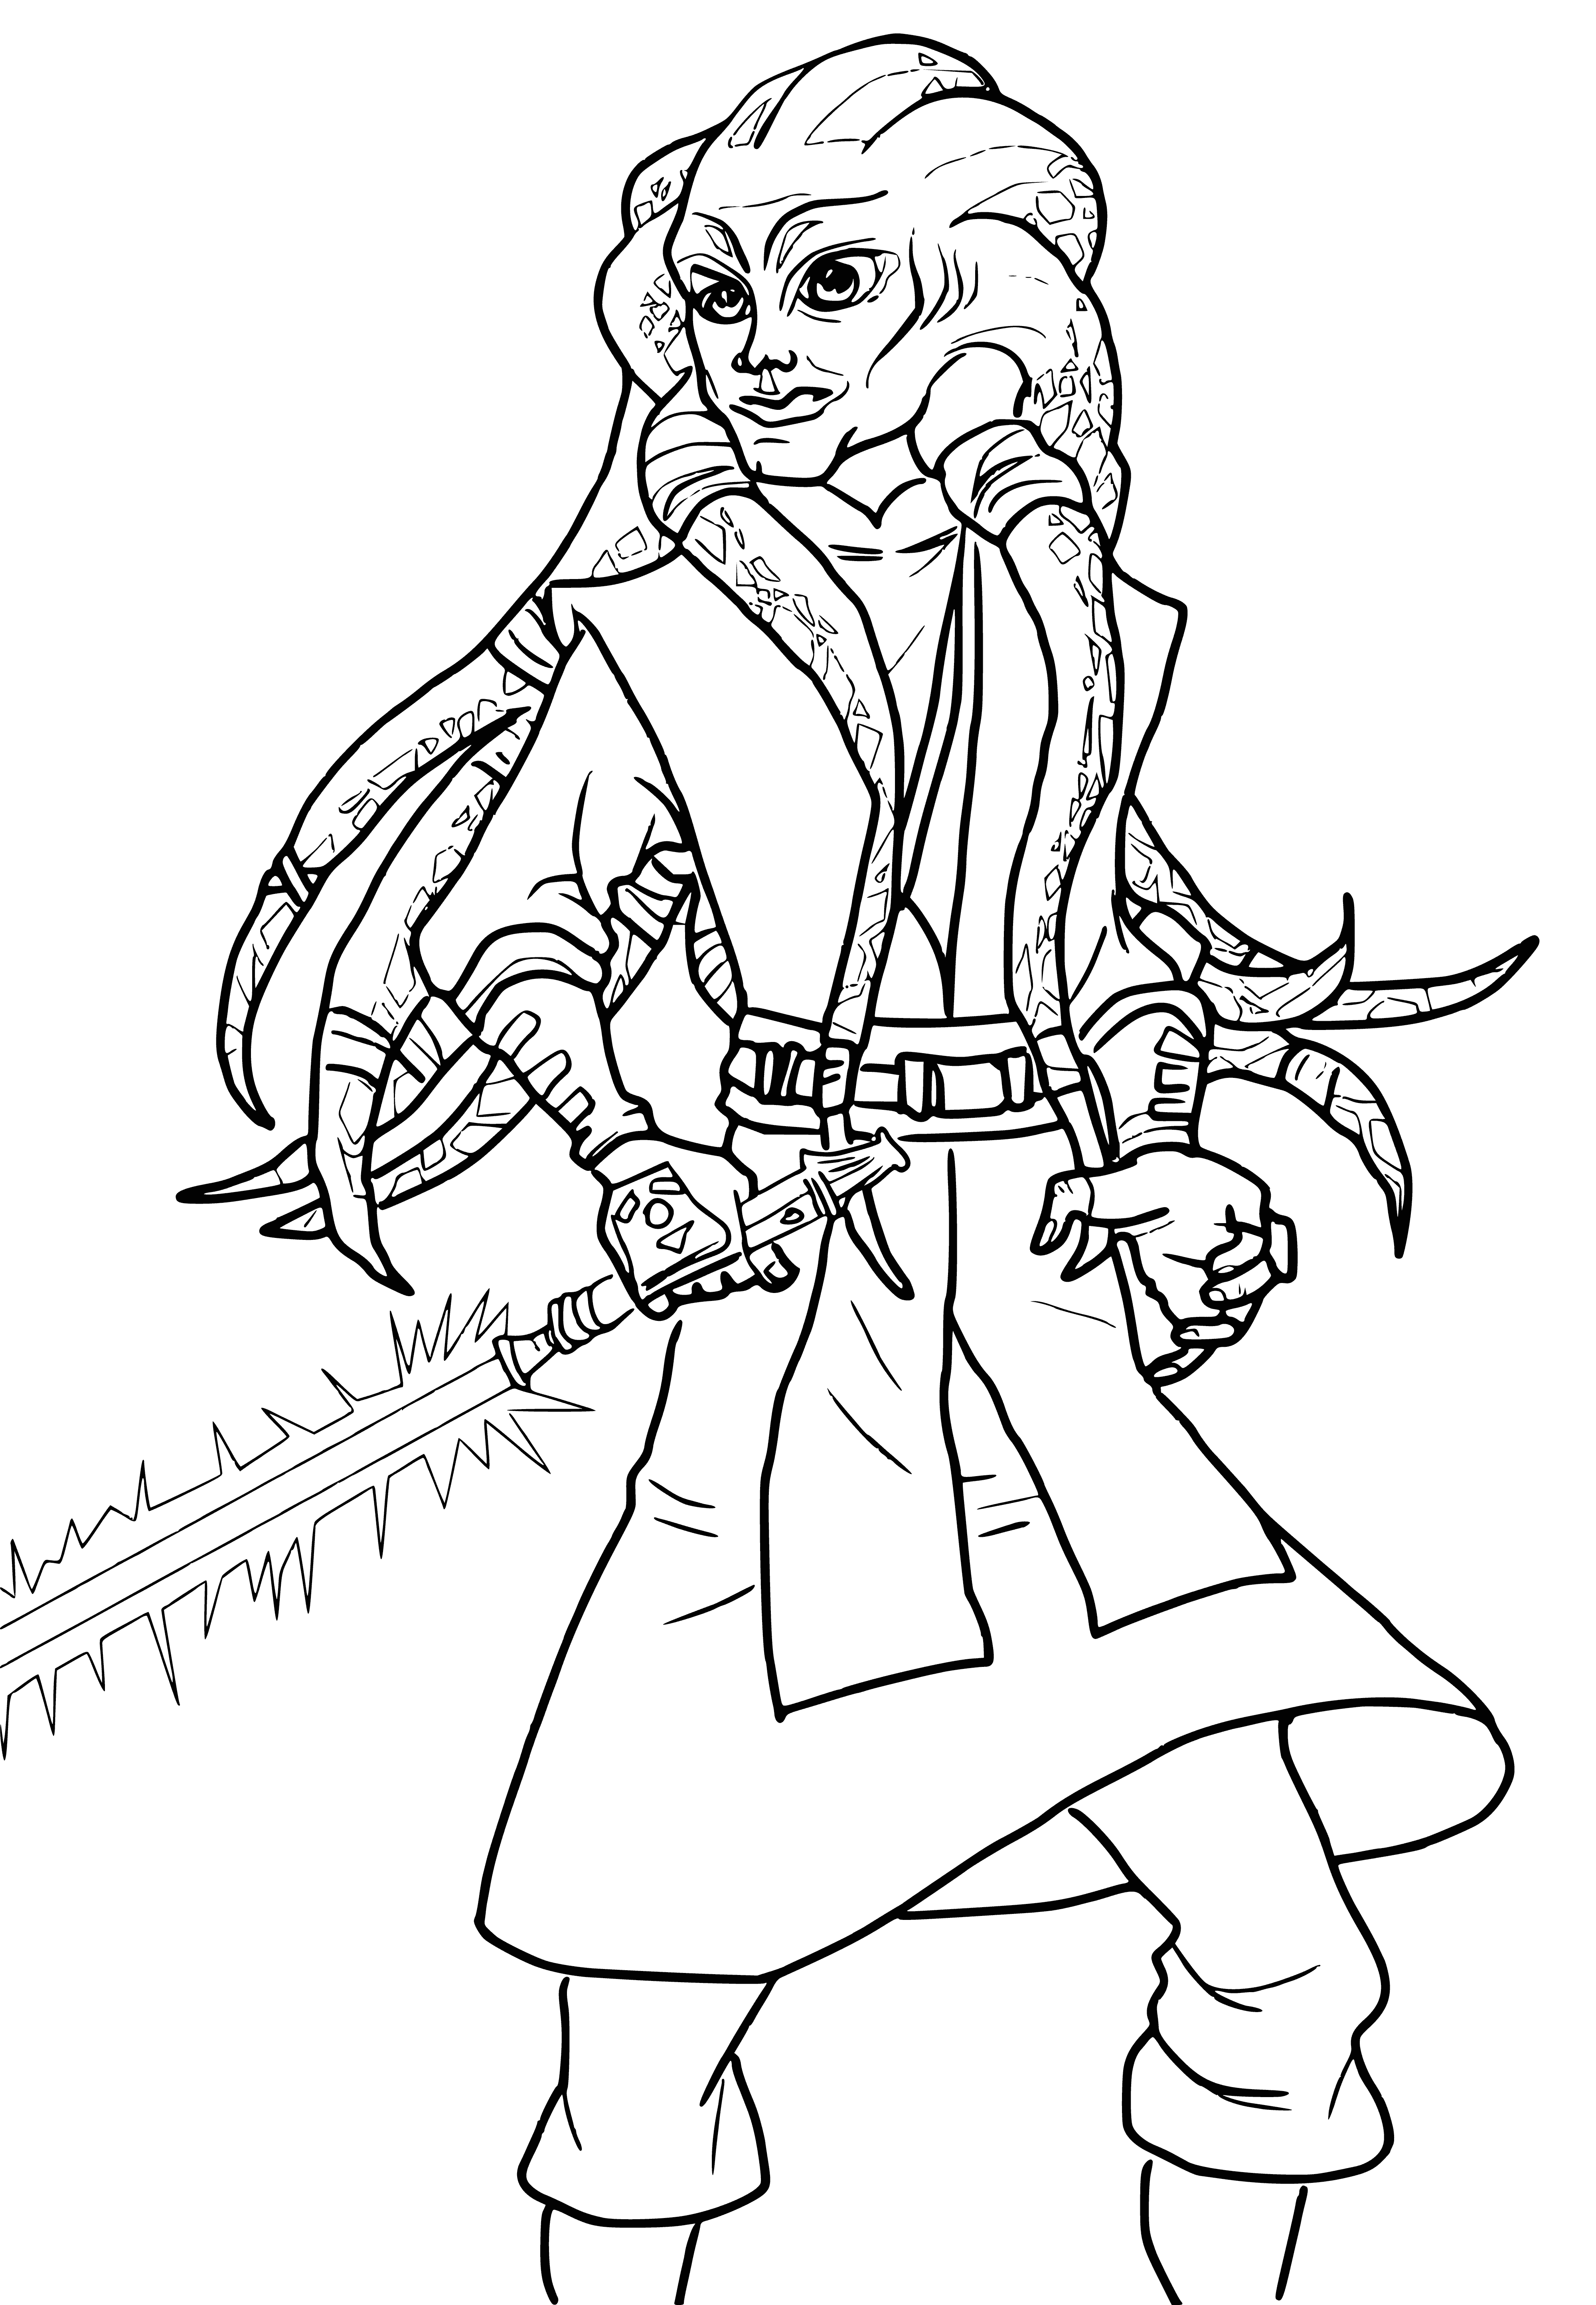 coloring page: Mysterious blue figure with a green face & white eyes wielding a lightsaber expertly fights enemy soldiers.